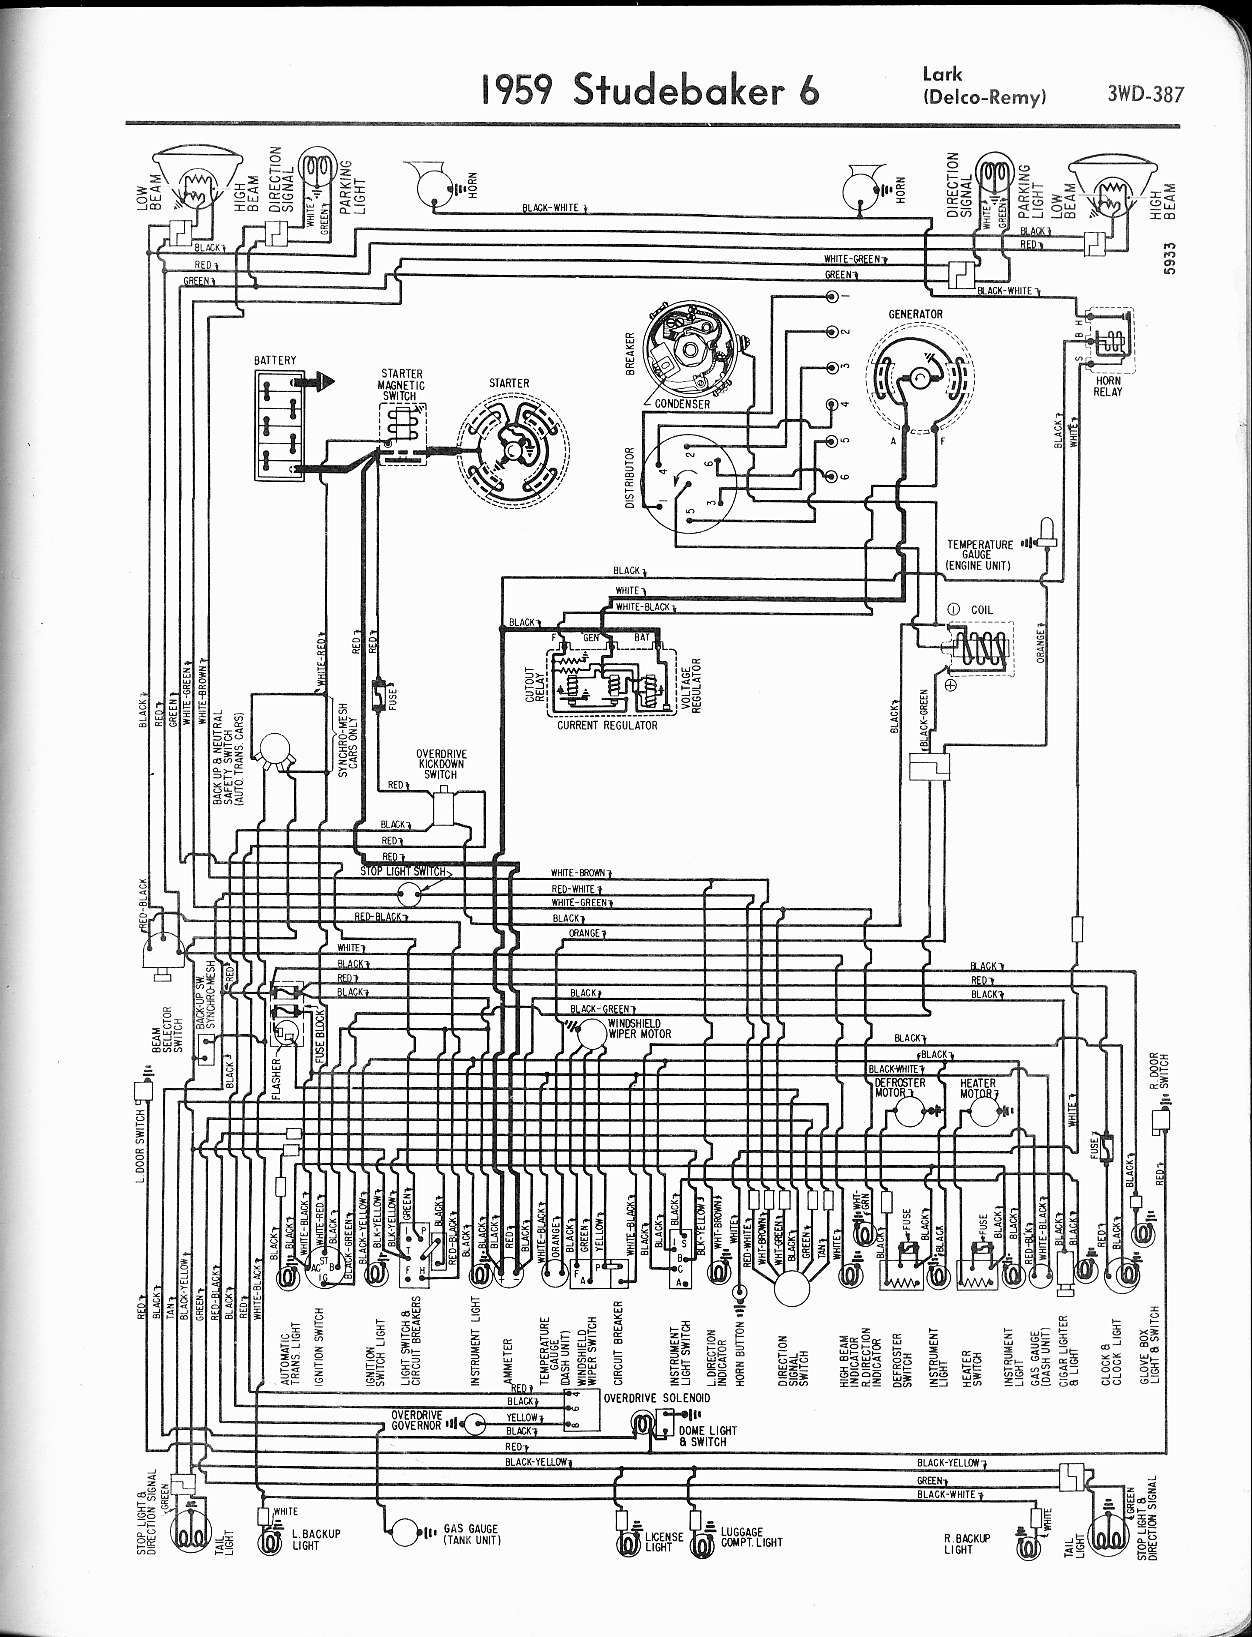 Studebaker wiring diagrams - The Old Car Manual Project 1950 ford pickup wiring diagram 